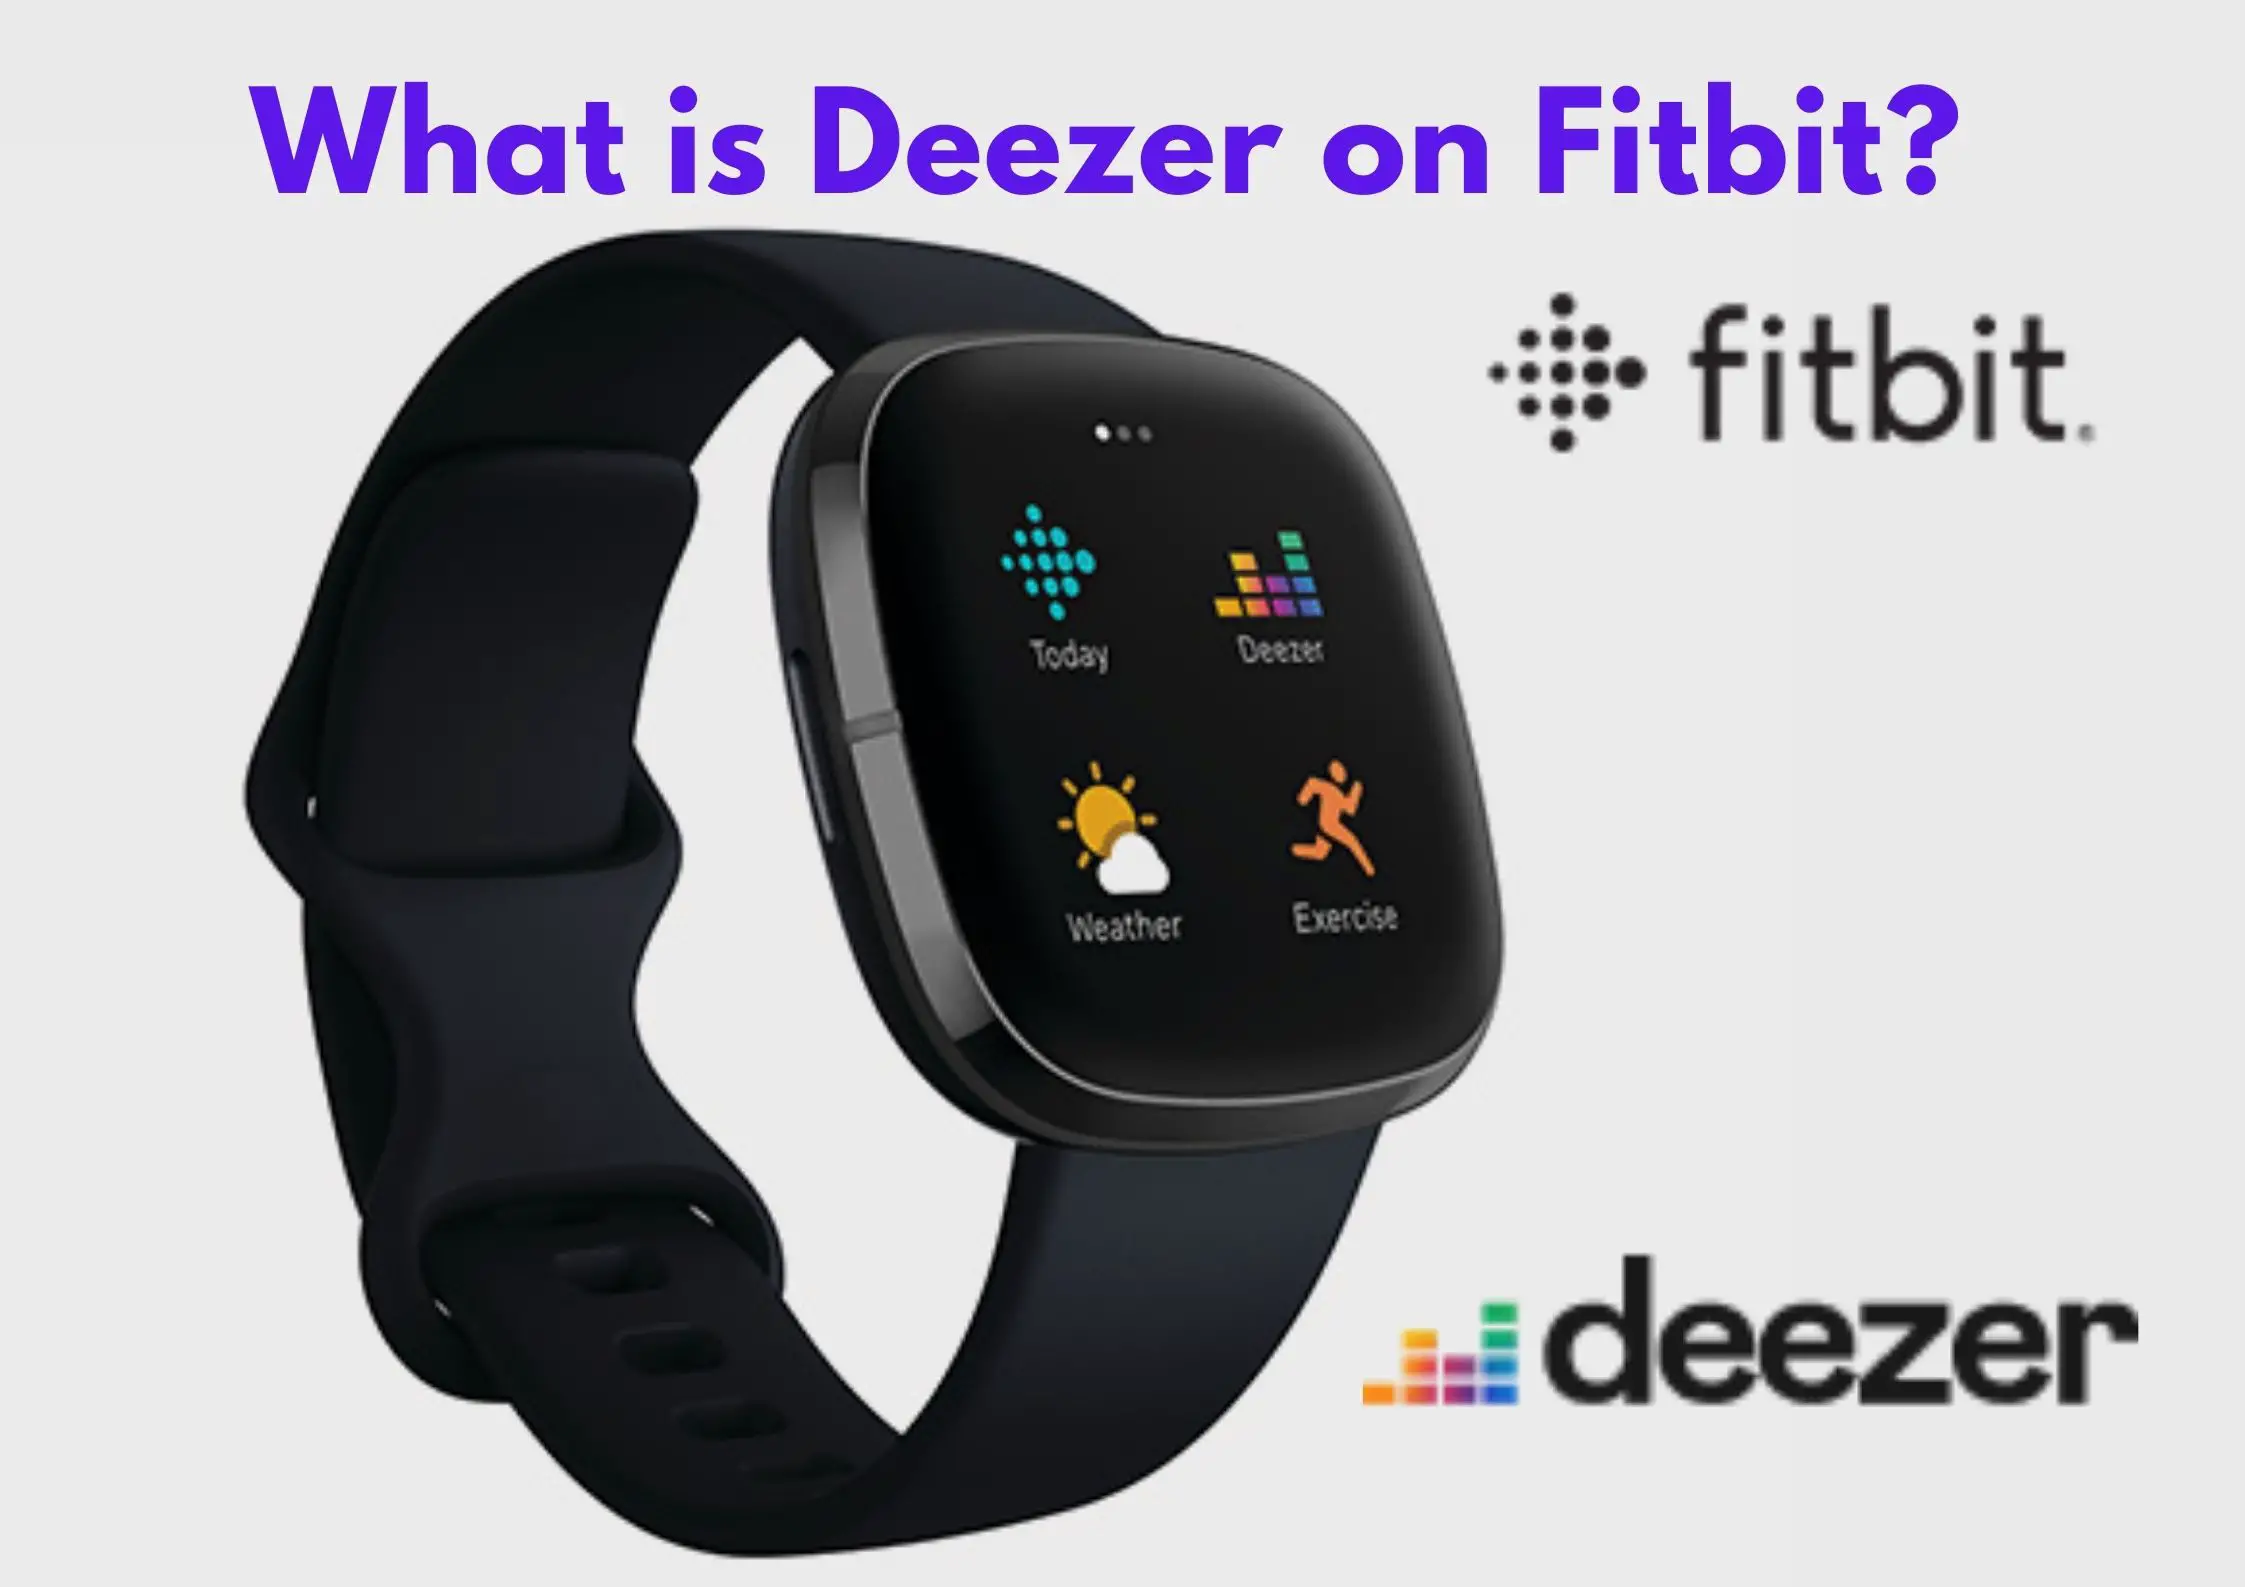 Deezer on Fitbit. Is this the Best Fitbit Music App?